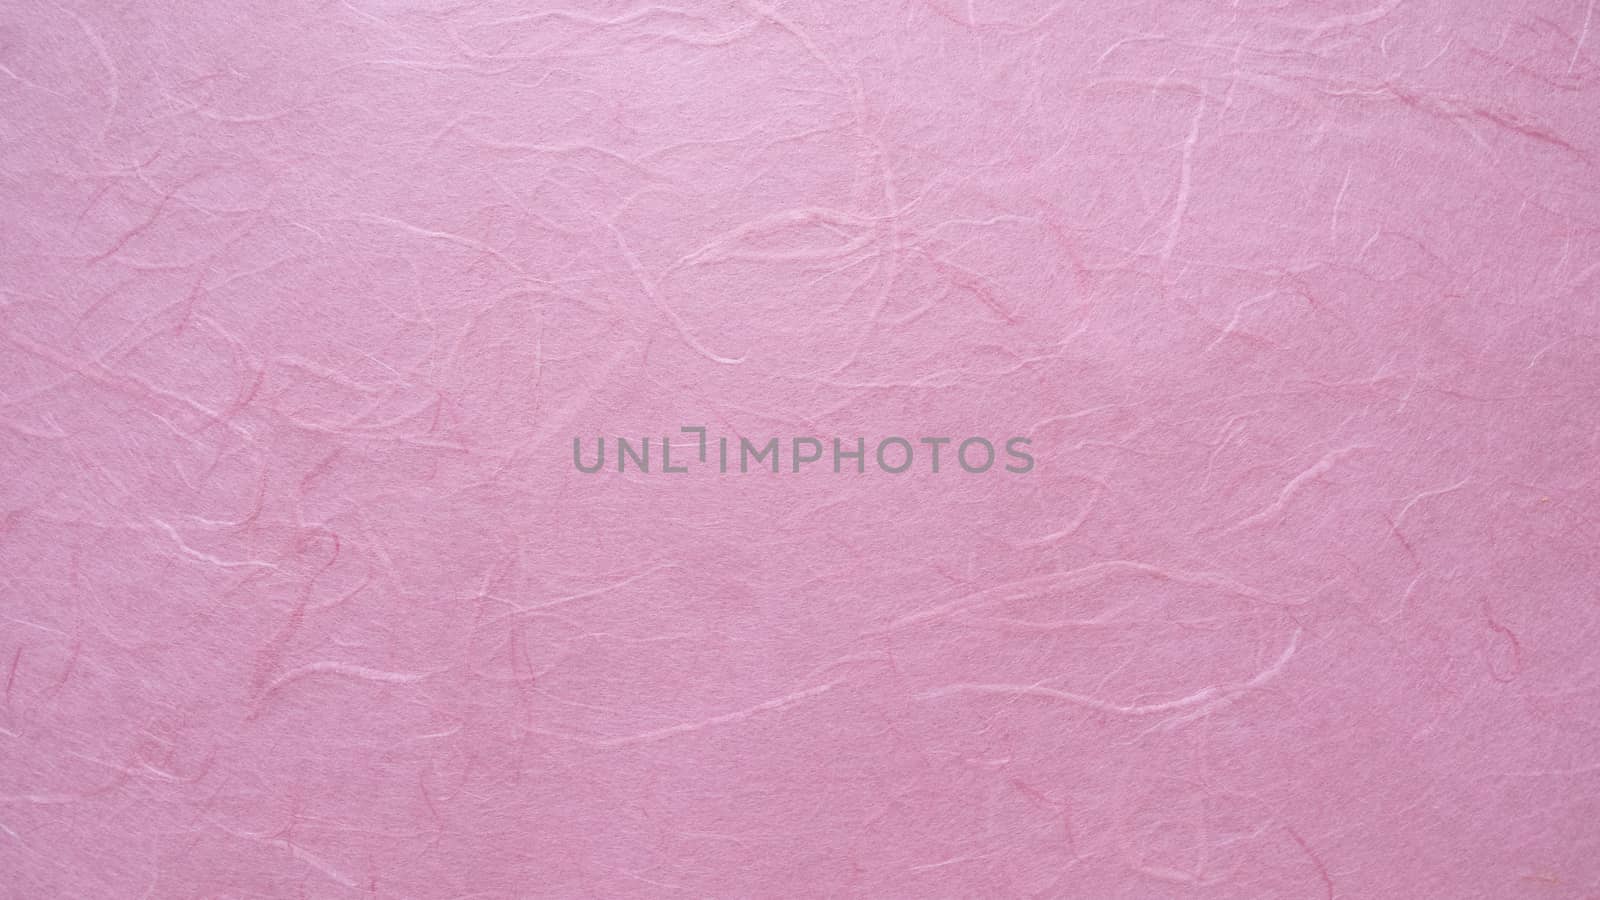 Pink Mulberry Paper texture background, Handmade paper horizontal with Unique design of paper, Soft natural paper style For aesthetic creative design